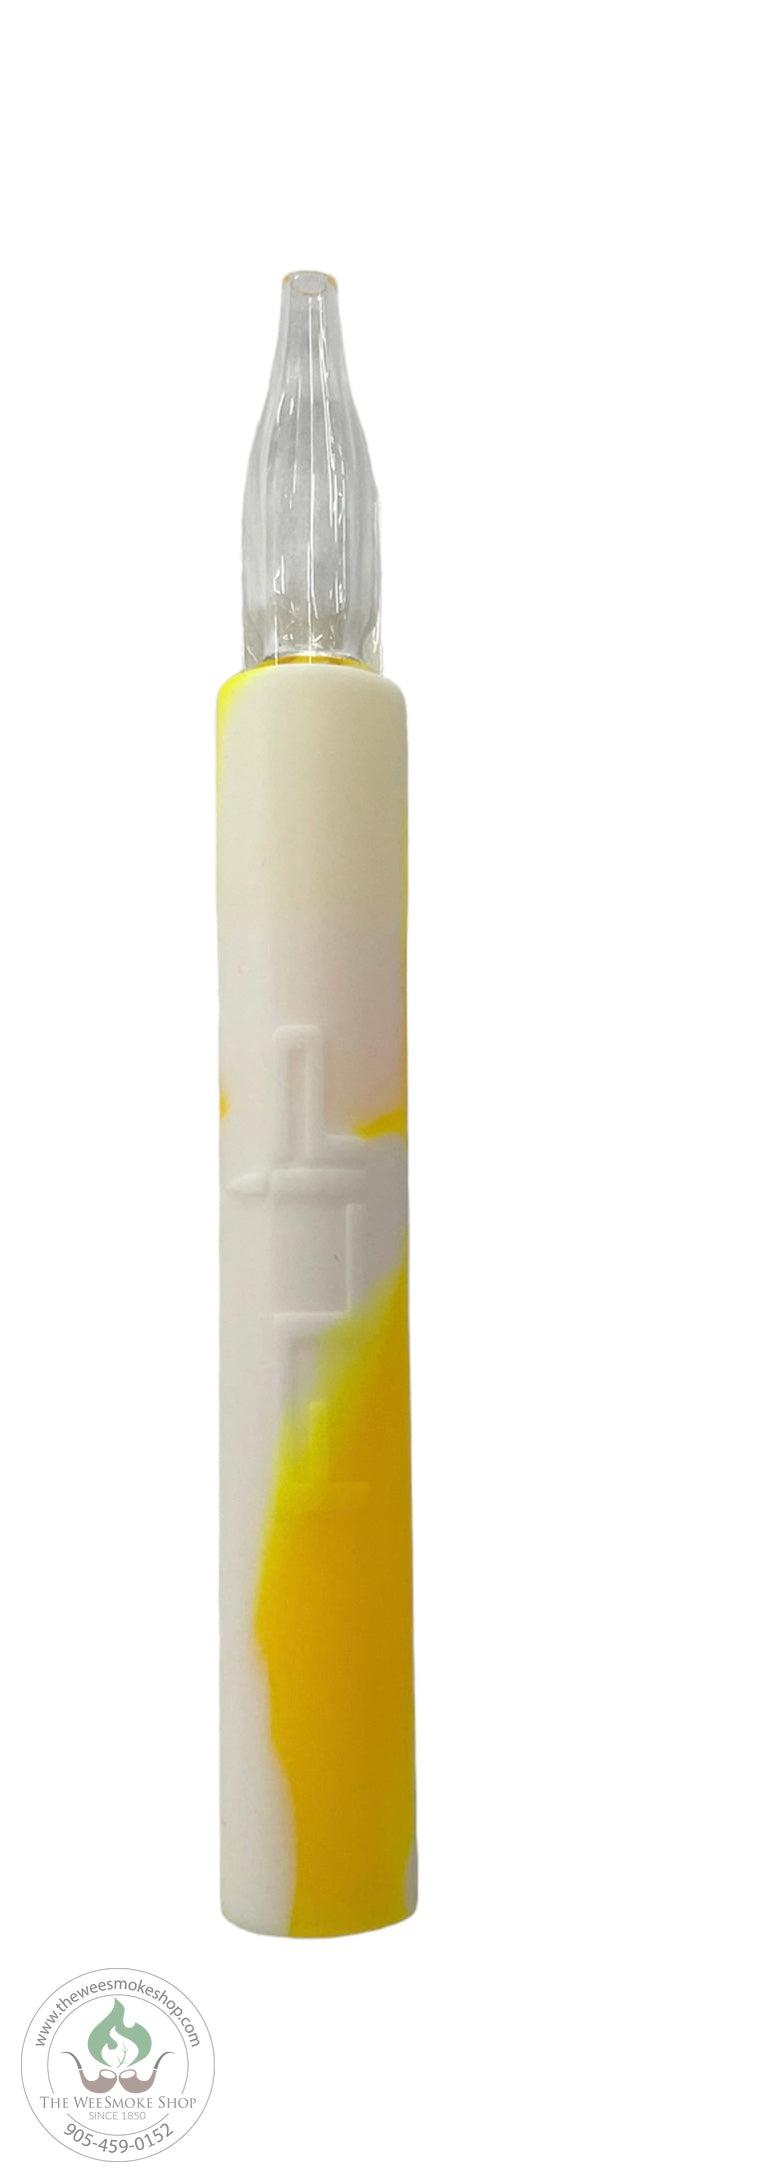 Flip Chillum/Dab Straw-Pipes-Yellow-The Wee Smoke Shop